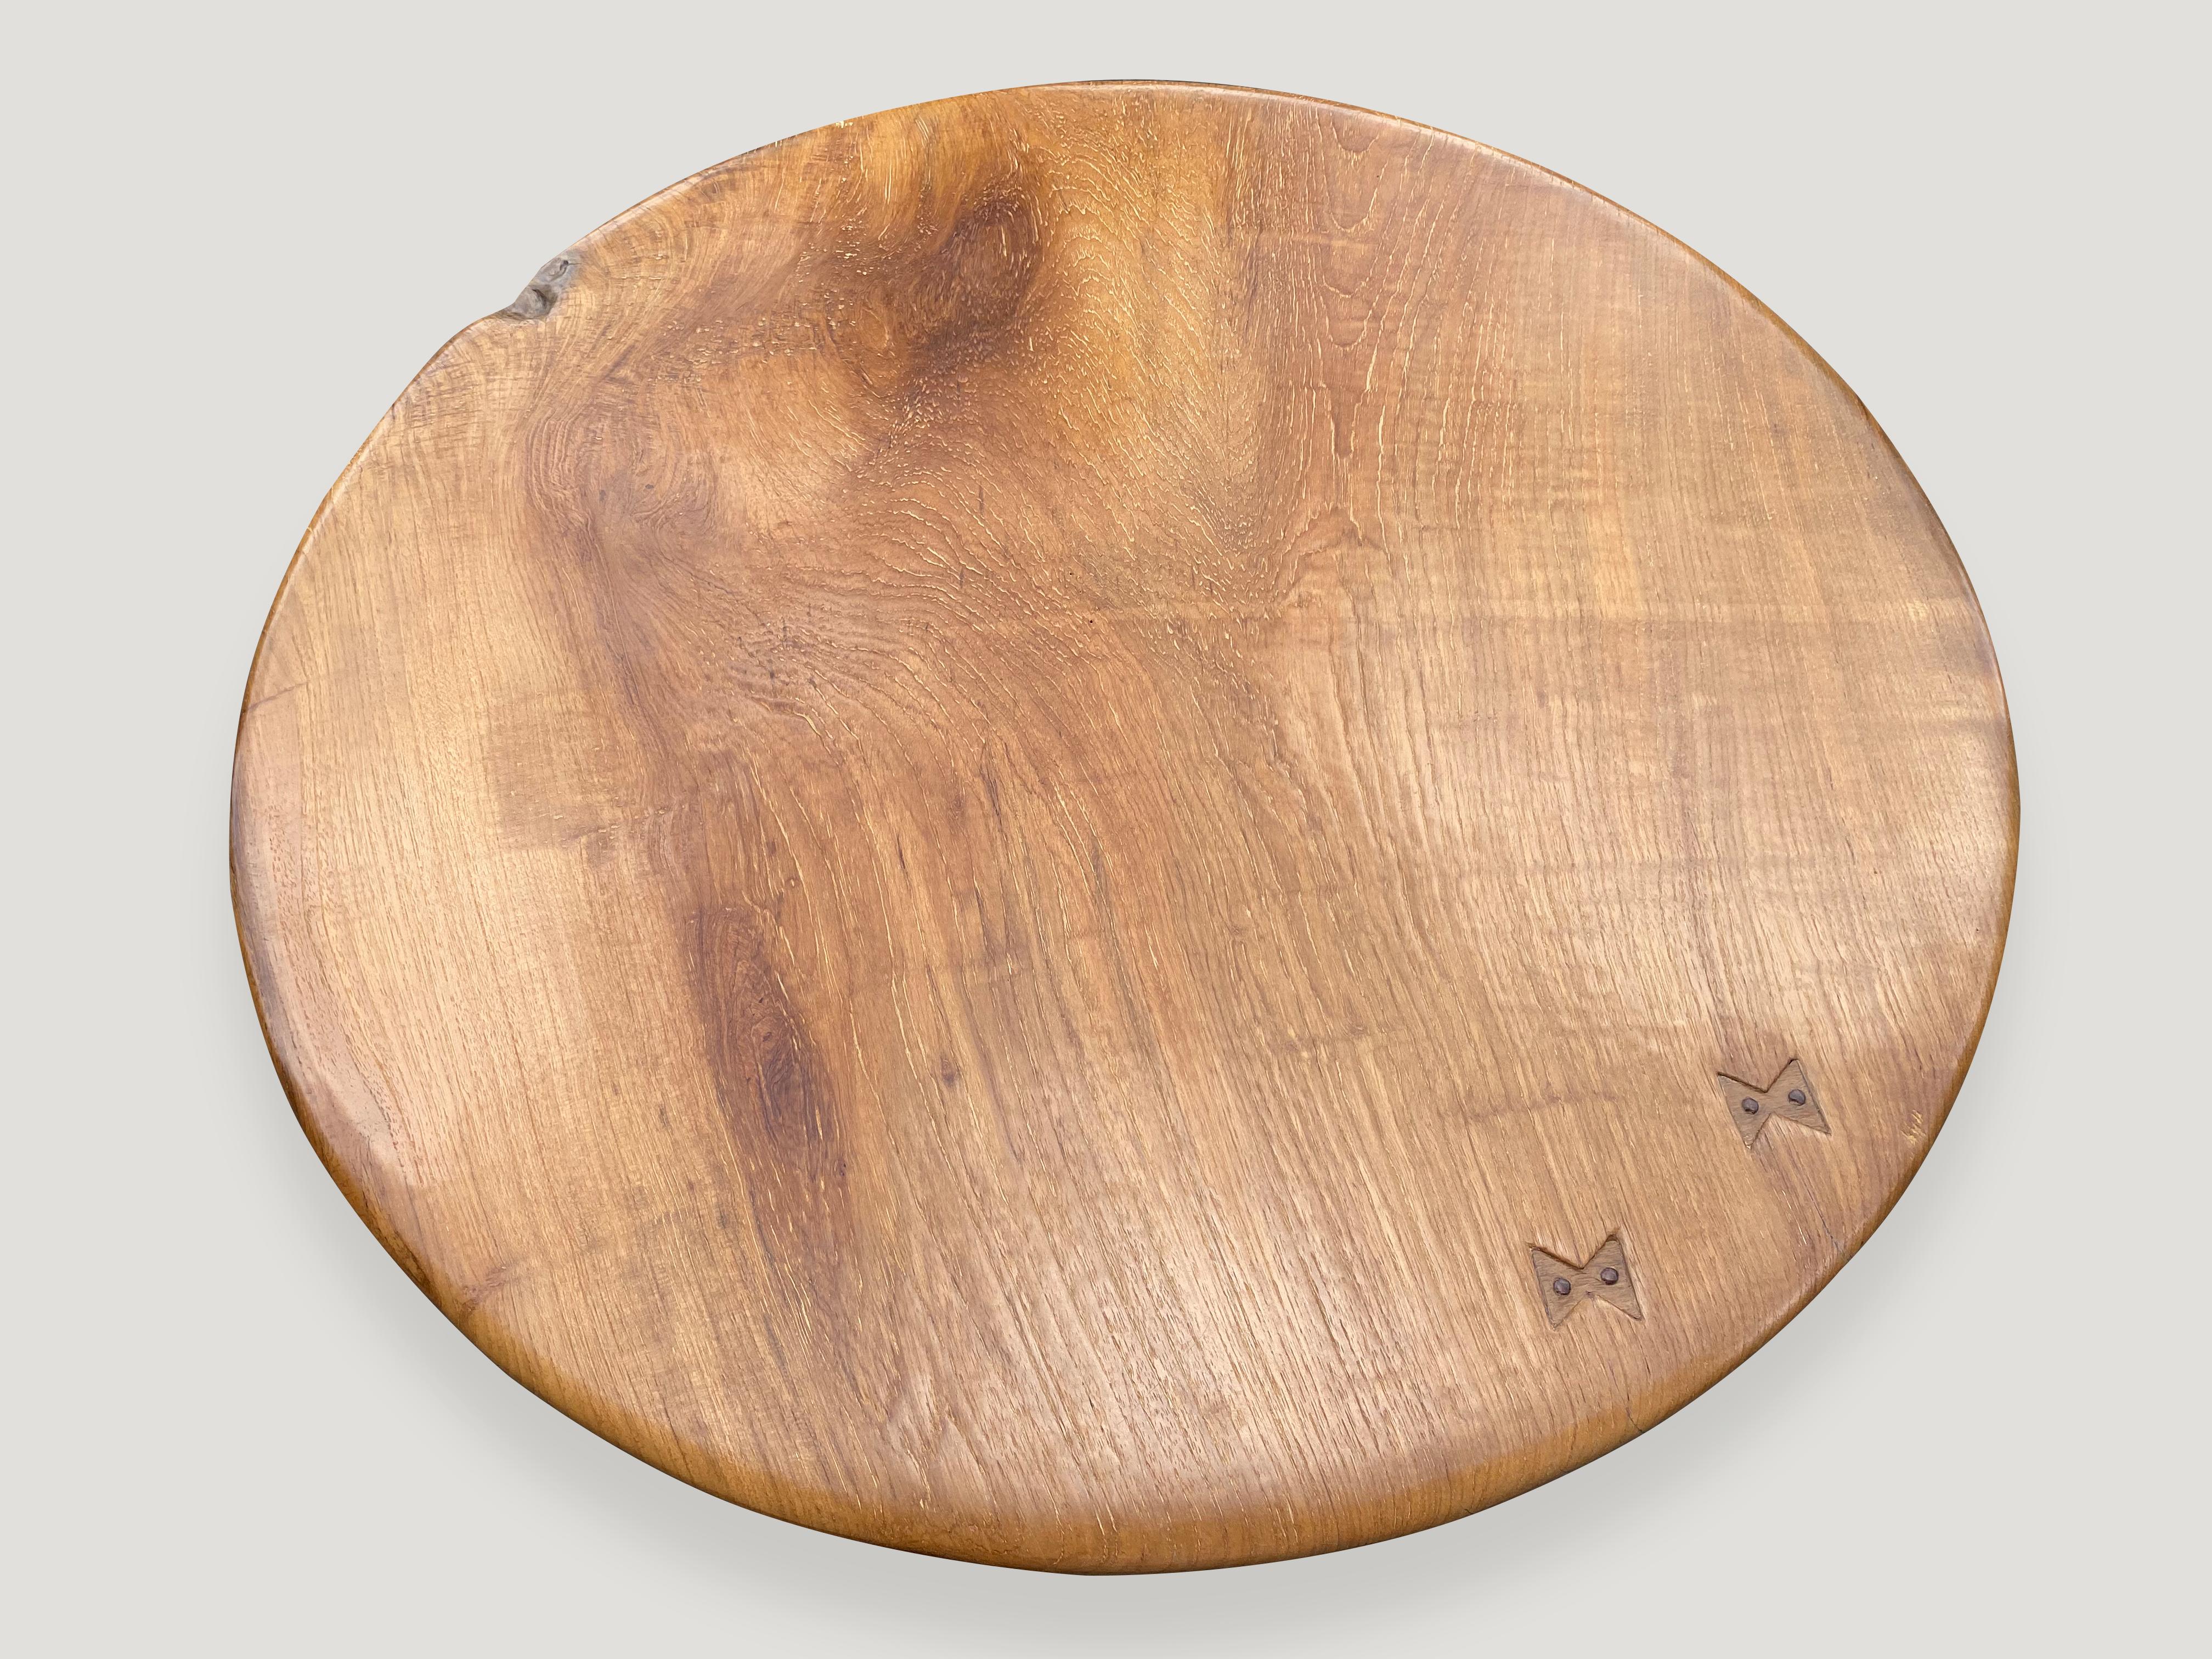 Andrianna Shamaris Midcentury Couture Round Teak Table with Butterflies Inlaid For Sale 3